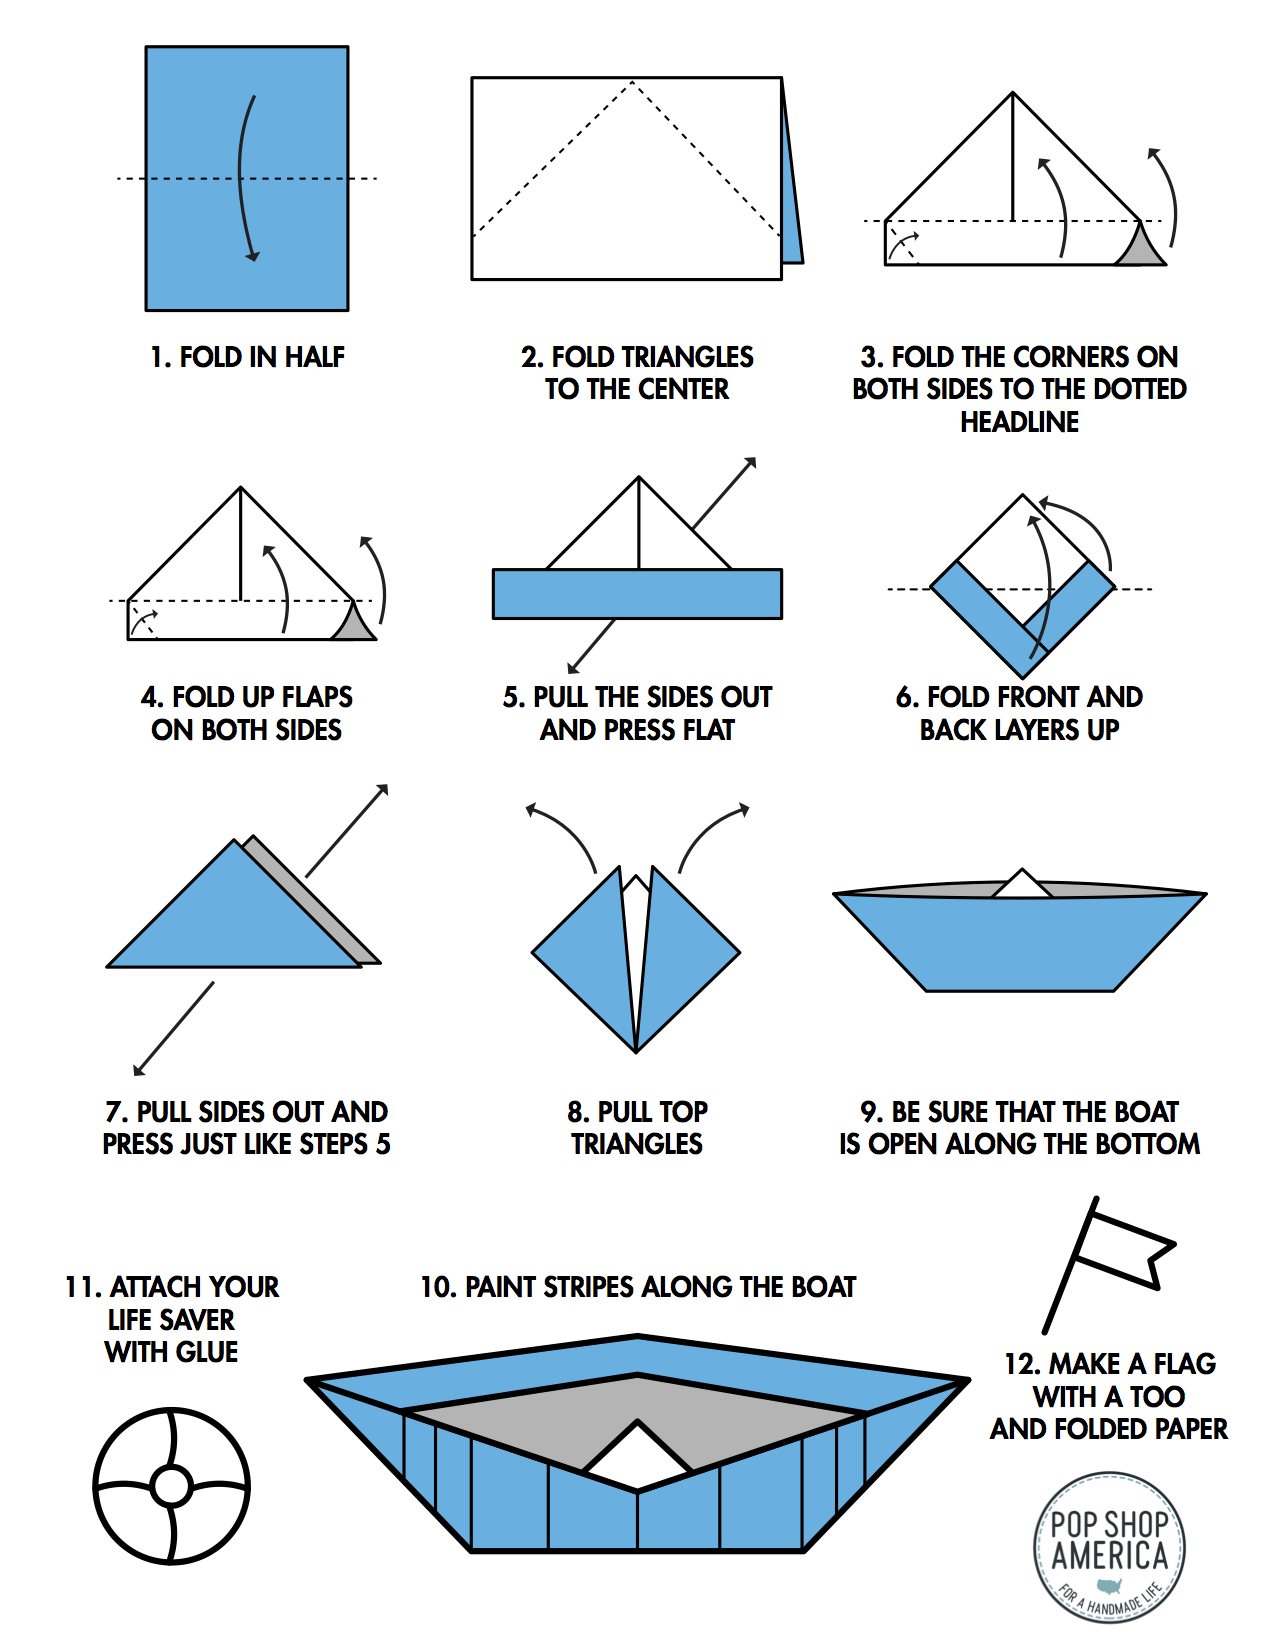 How To Make An Origami Boat Step By Step How To Make A Paper Boat With A Flag Lifesaver